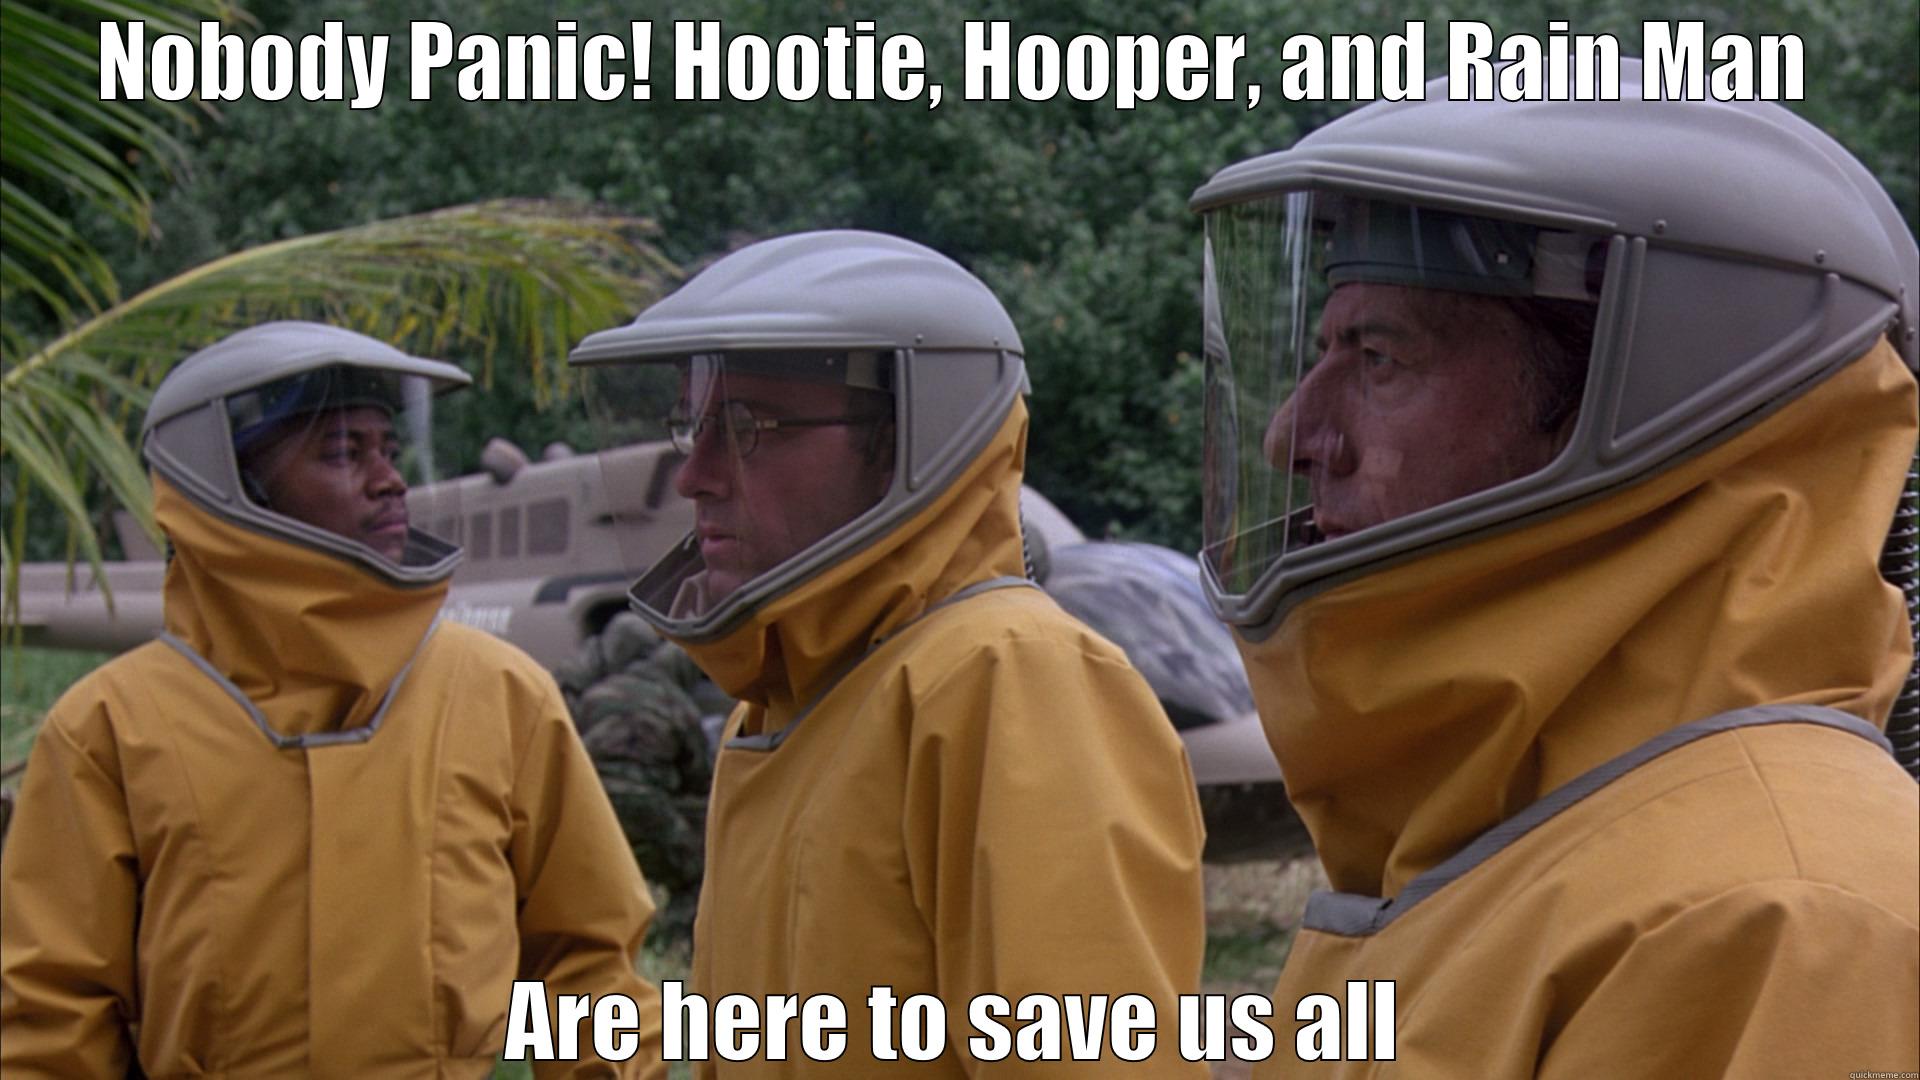 Ebola Is too Funny - NOBODY PANIC! HOOTIE, HOOPER, AND RAIN MAN ARE HERE TO SAVE US ALL Misc